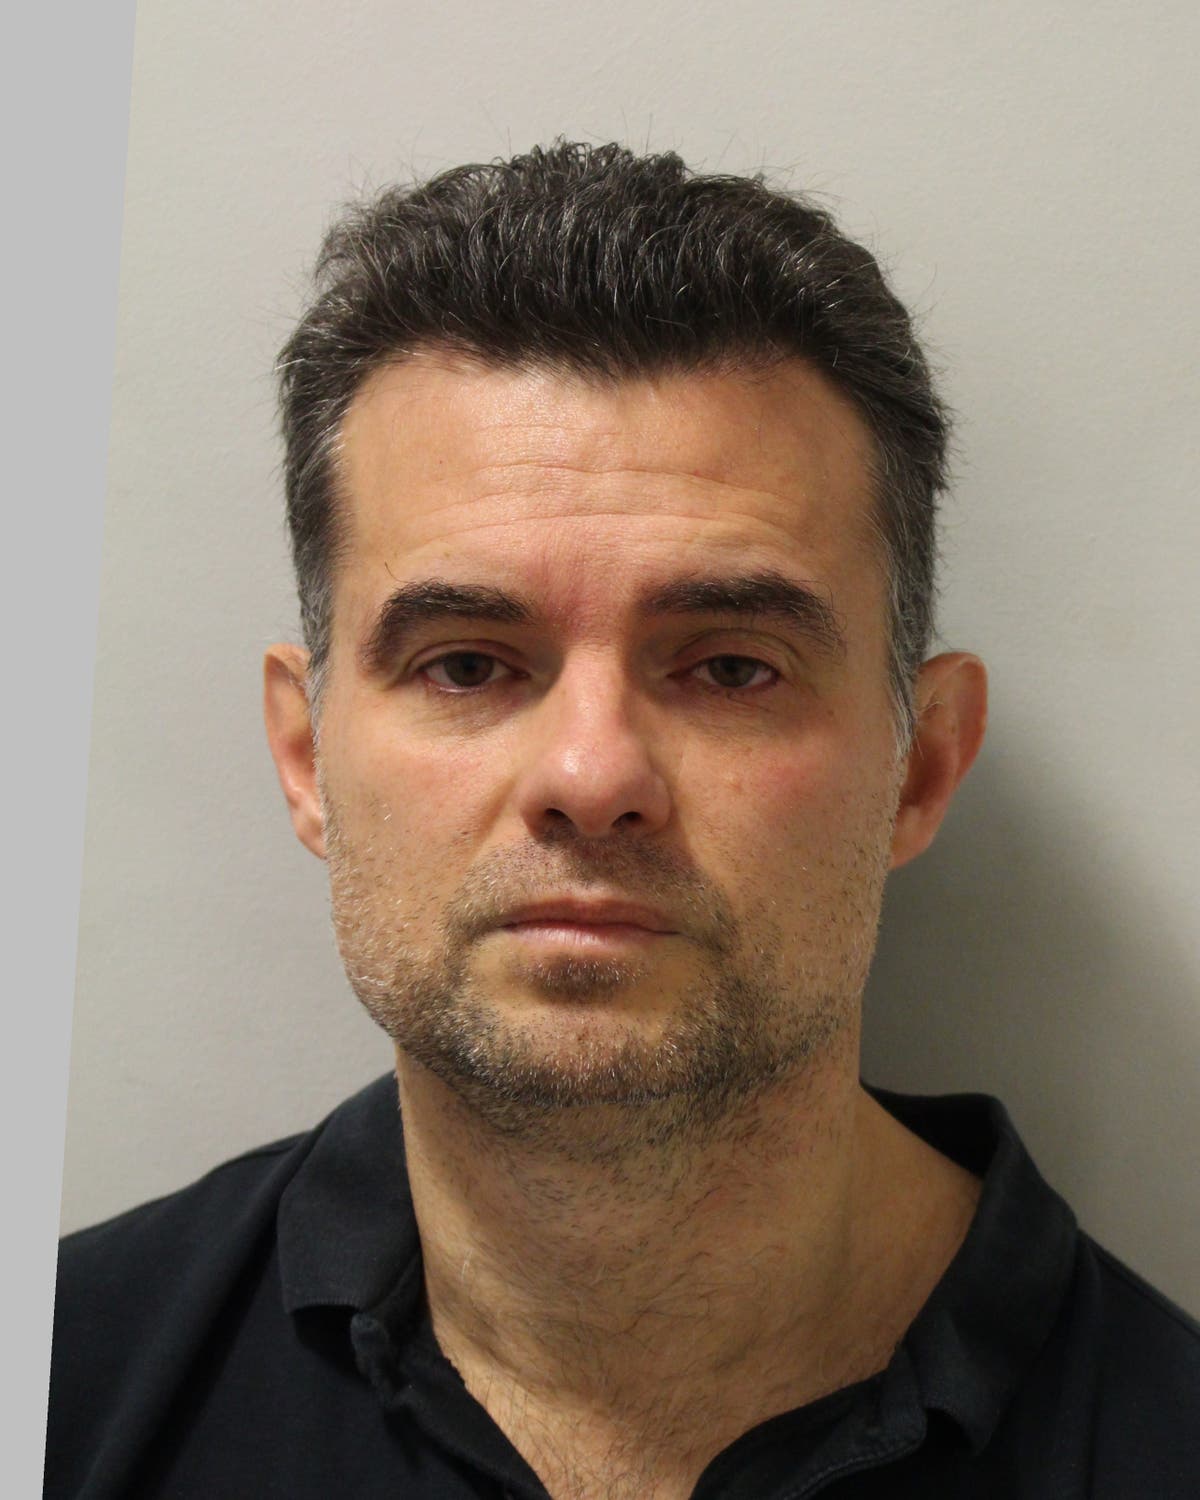 London masseur who assaulted 10 female clients in their homes convicted